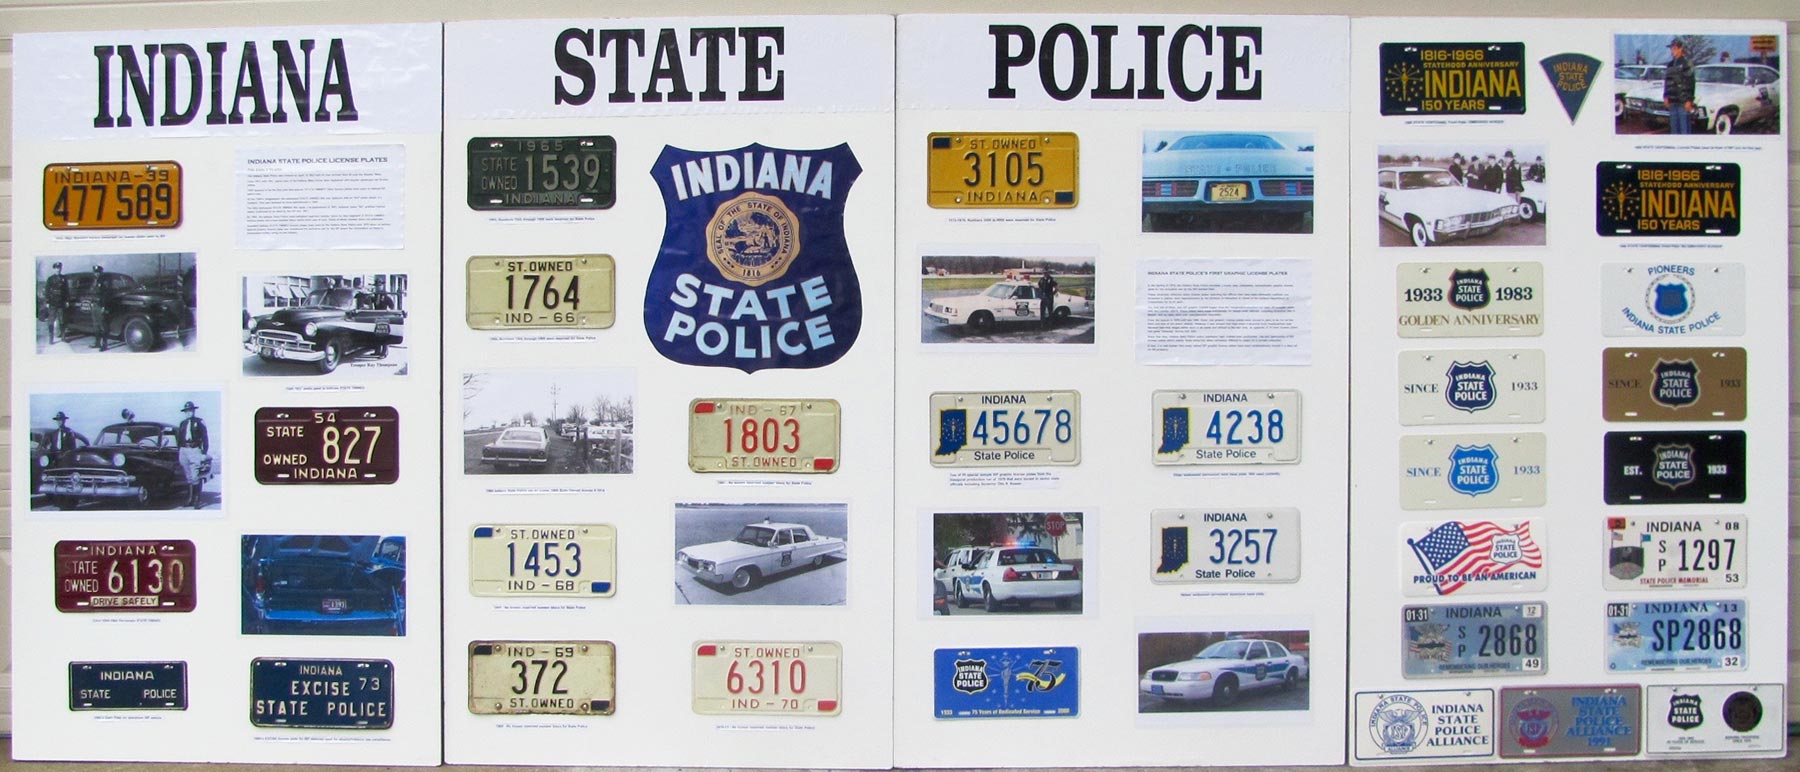 Indiana police plate display